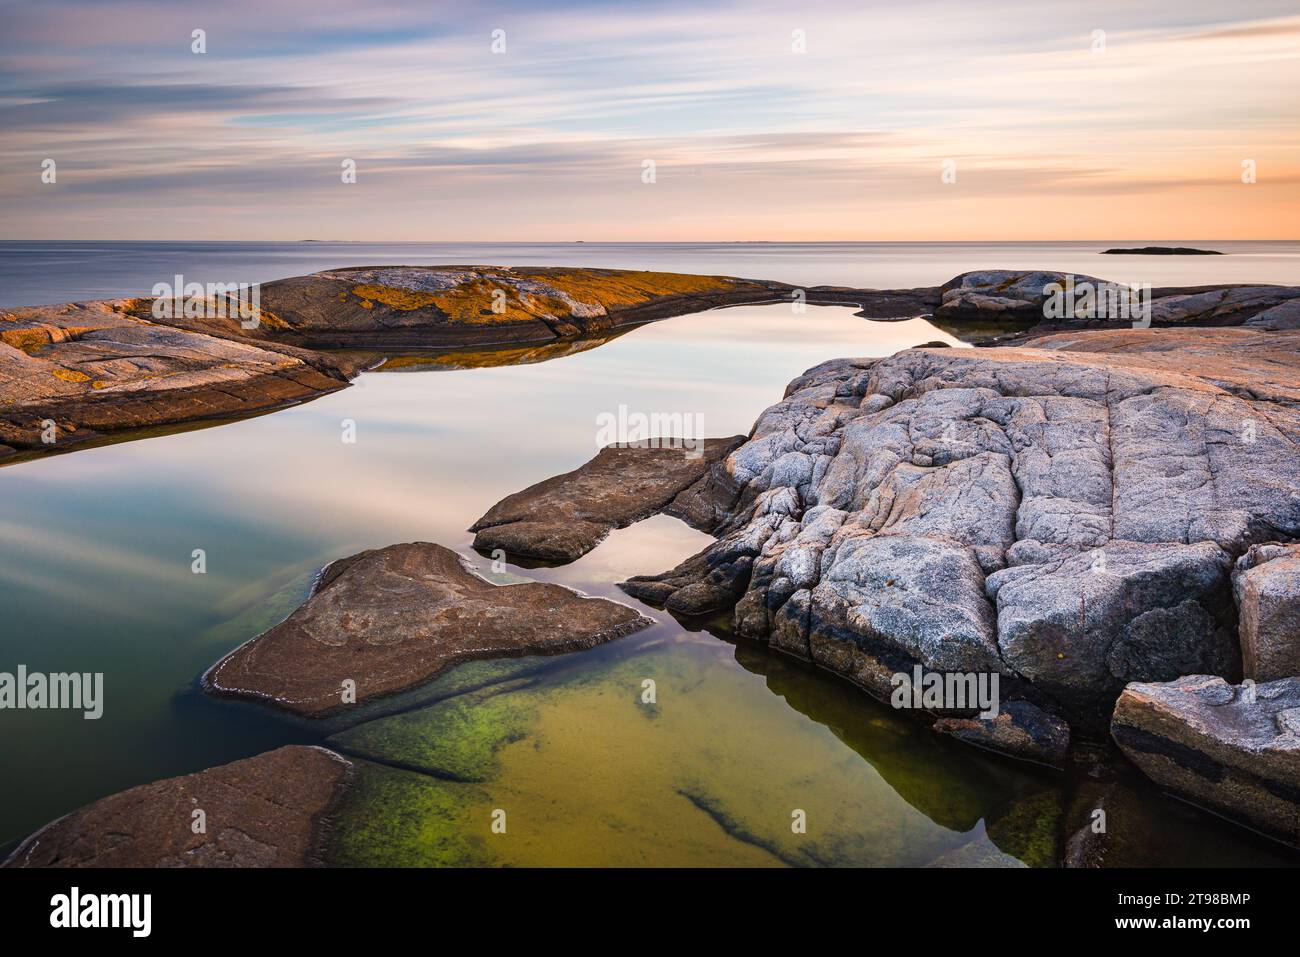 Beautiful sunset over the rocky shore of a beach. Stock Photo